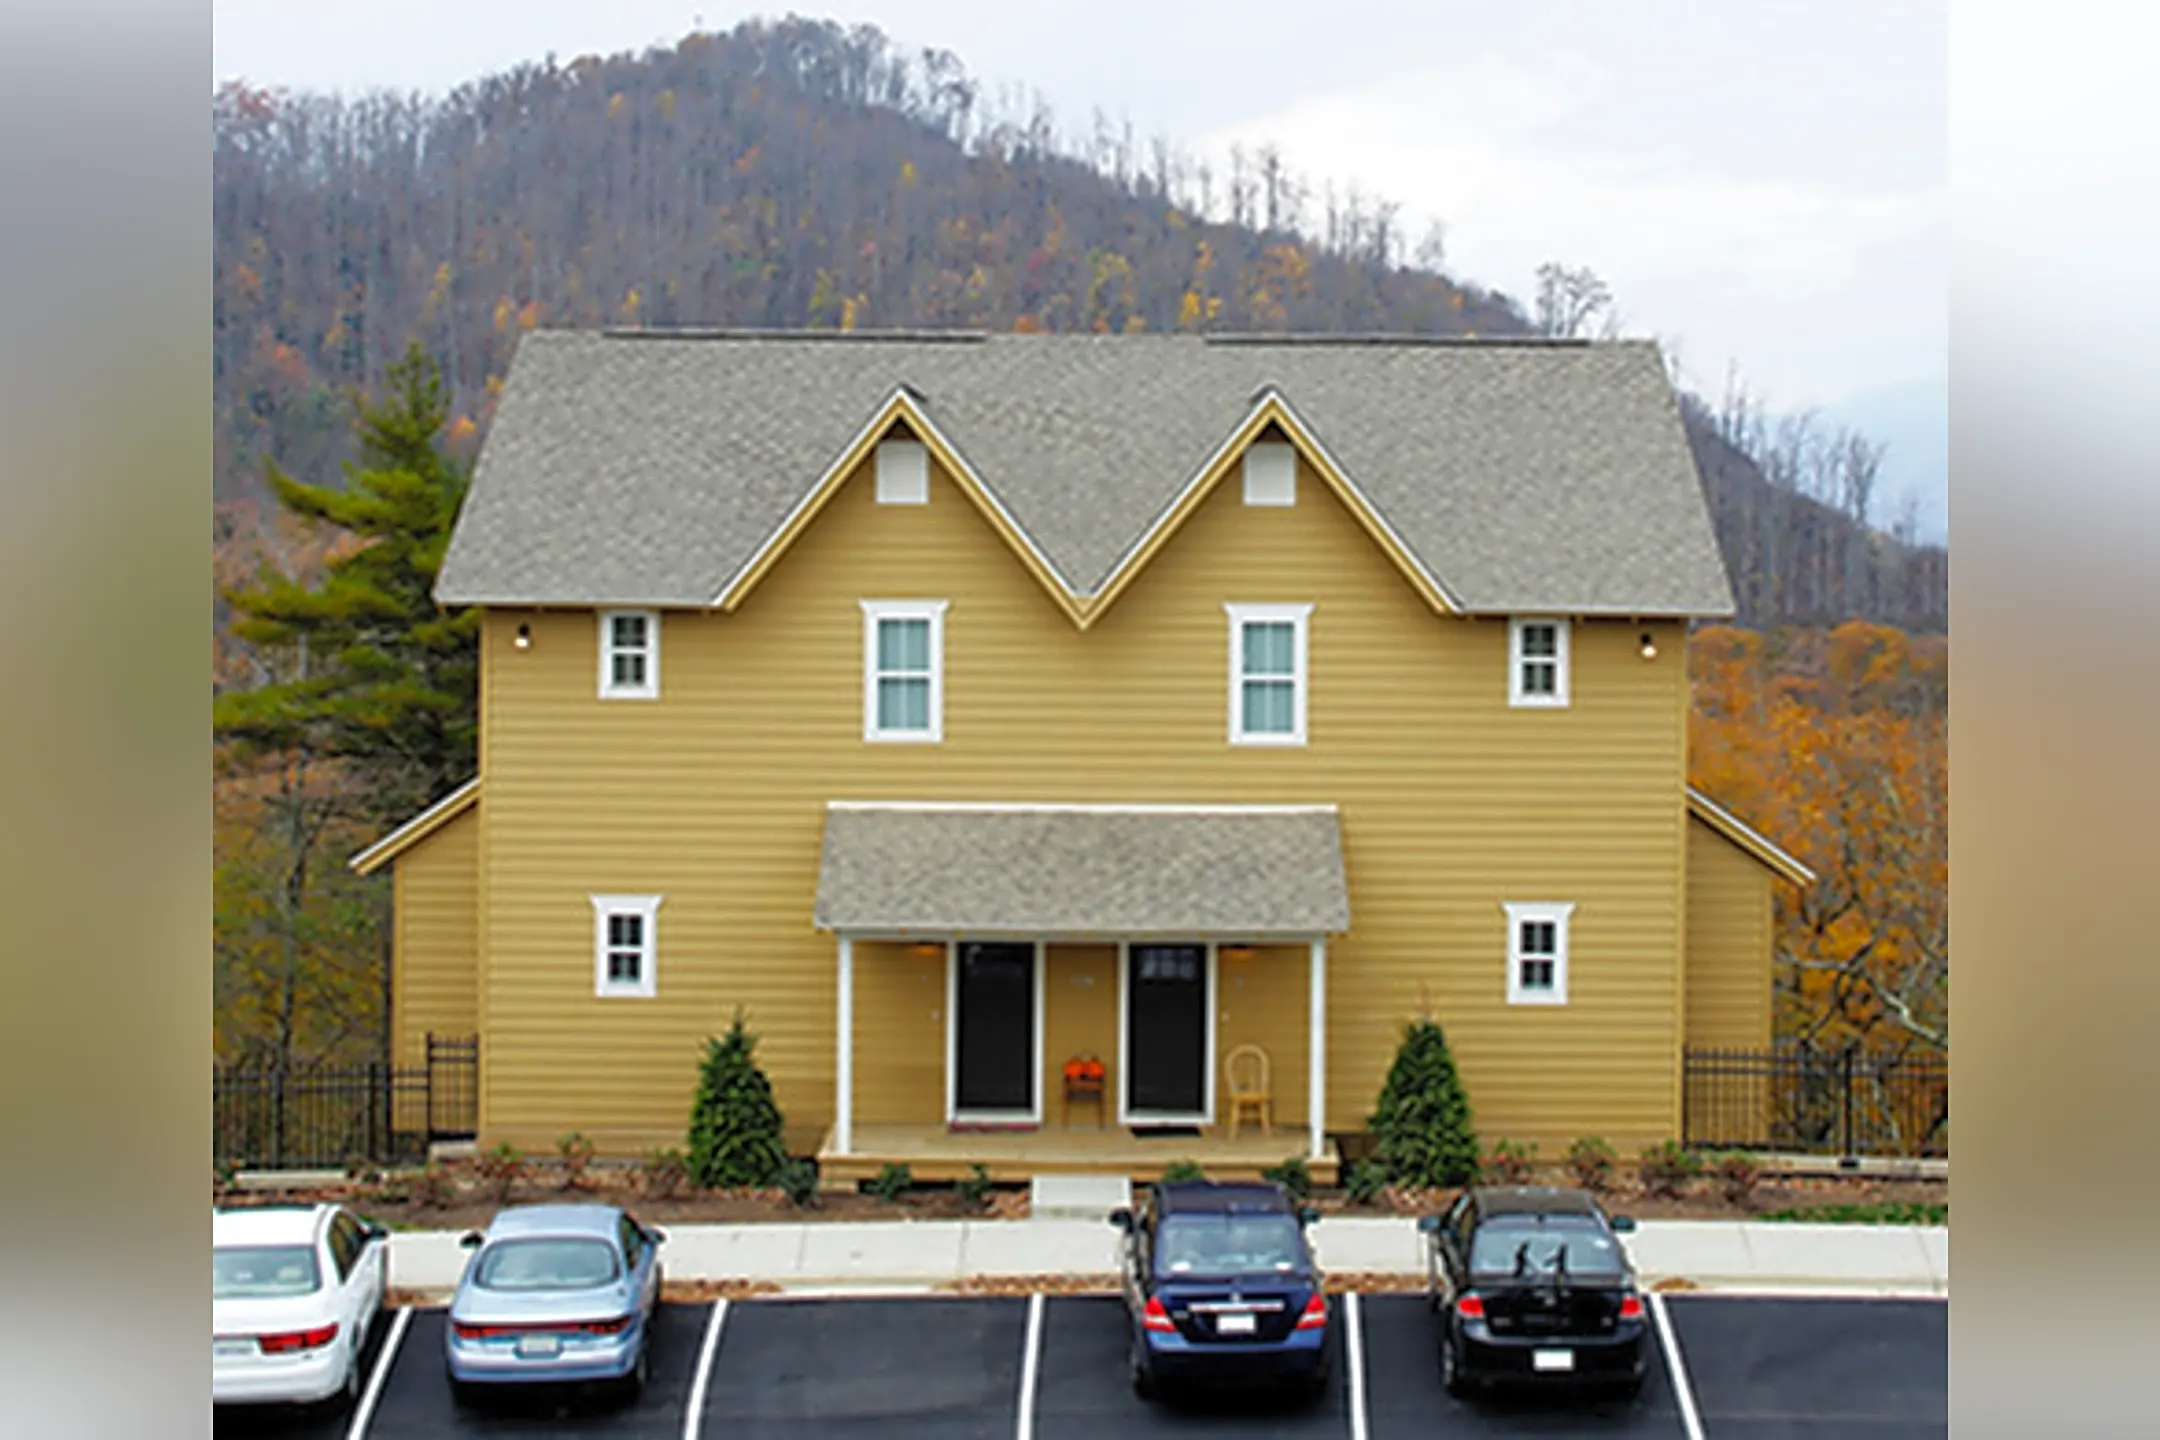 The Cottages of Boone - Per Bed Lease - Boone, NC